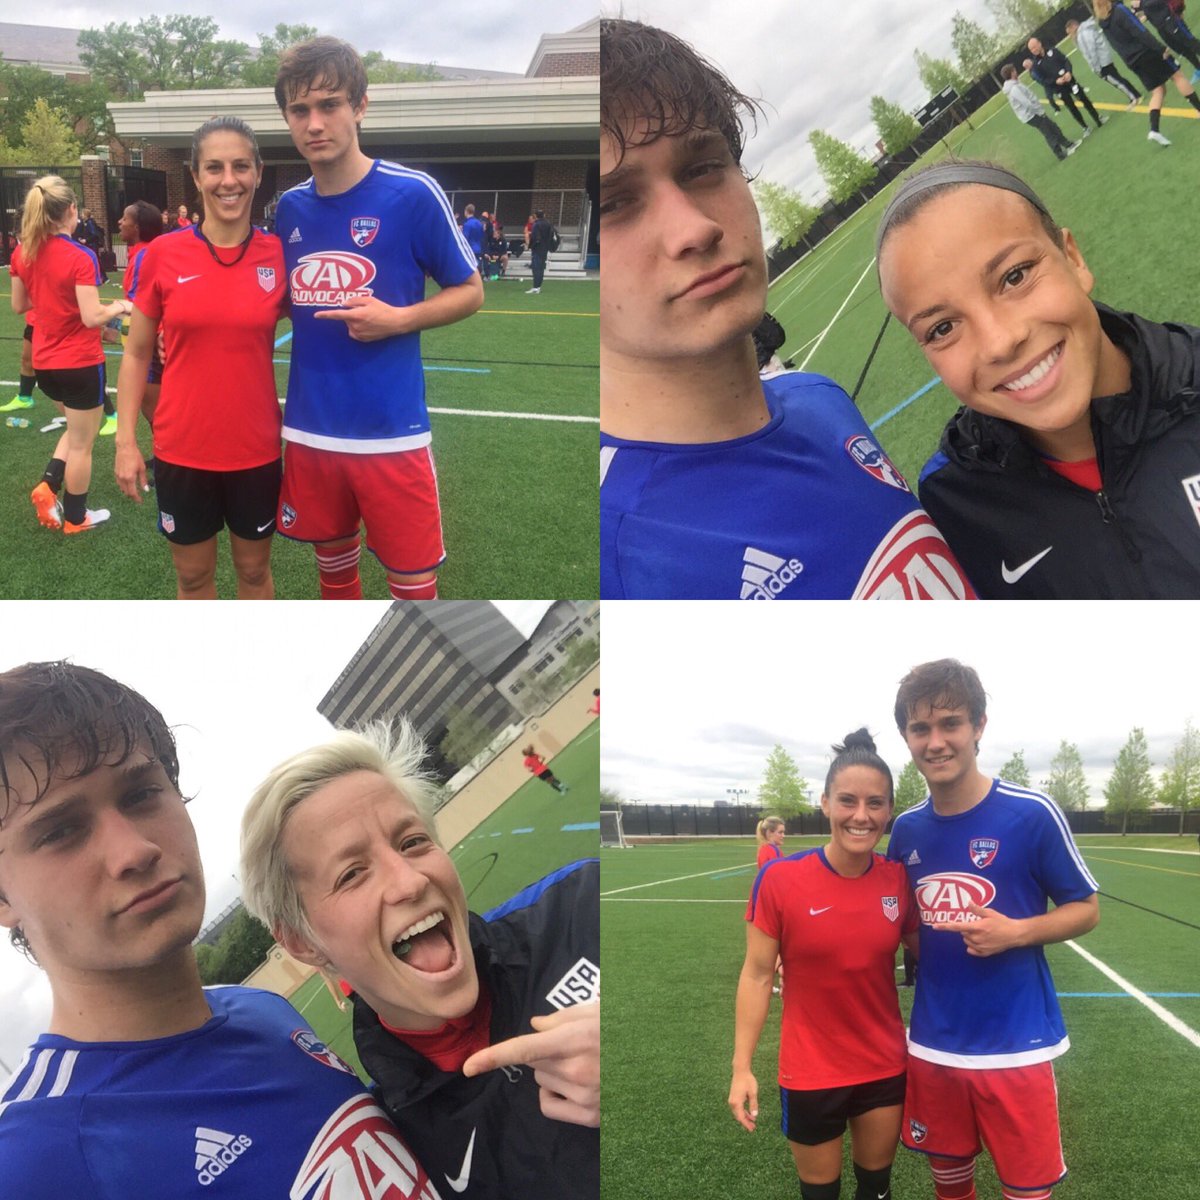 The U.S. women's soccer team that won the last world cup was beat 5-2 by a group of 14 year old boys. Look at the size difference in these pictures. The 14 year old boy dwarf the women.